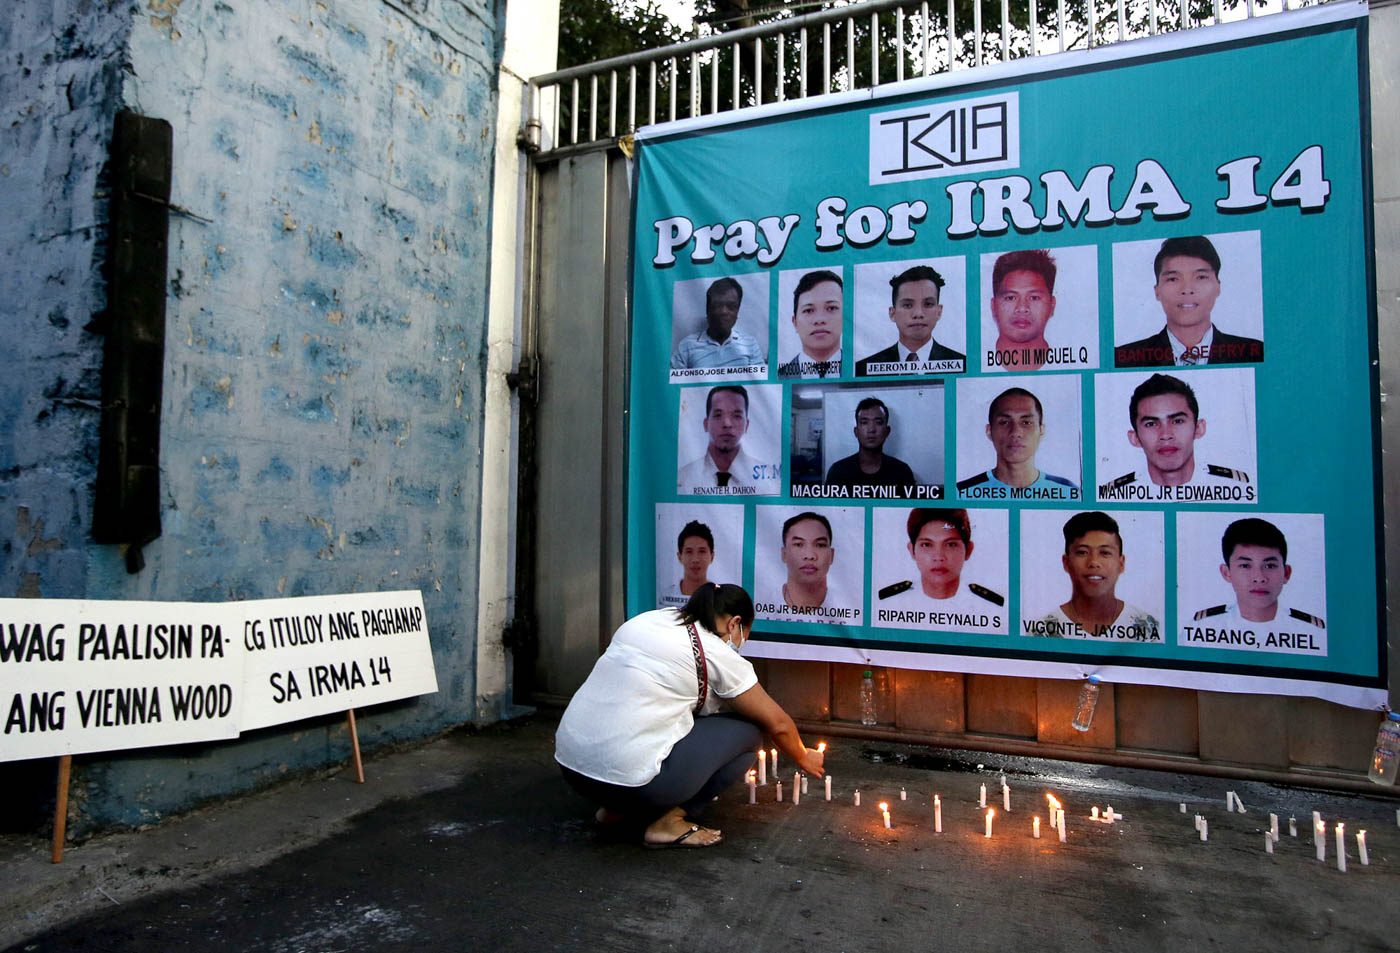 VIGIL. Families and fellow workers hold a prayer vigil at Irma Fishing and Trading in Malabon on July 1, 2020, for 14 fishermen and crew who went missing after their fishing boat Liberty 5 collided with the Hong Kong-flagged cargo ship Vienna Wood in Occidental Mindoro. Photo by Inoue Jaena/Rappler 